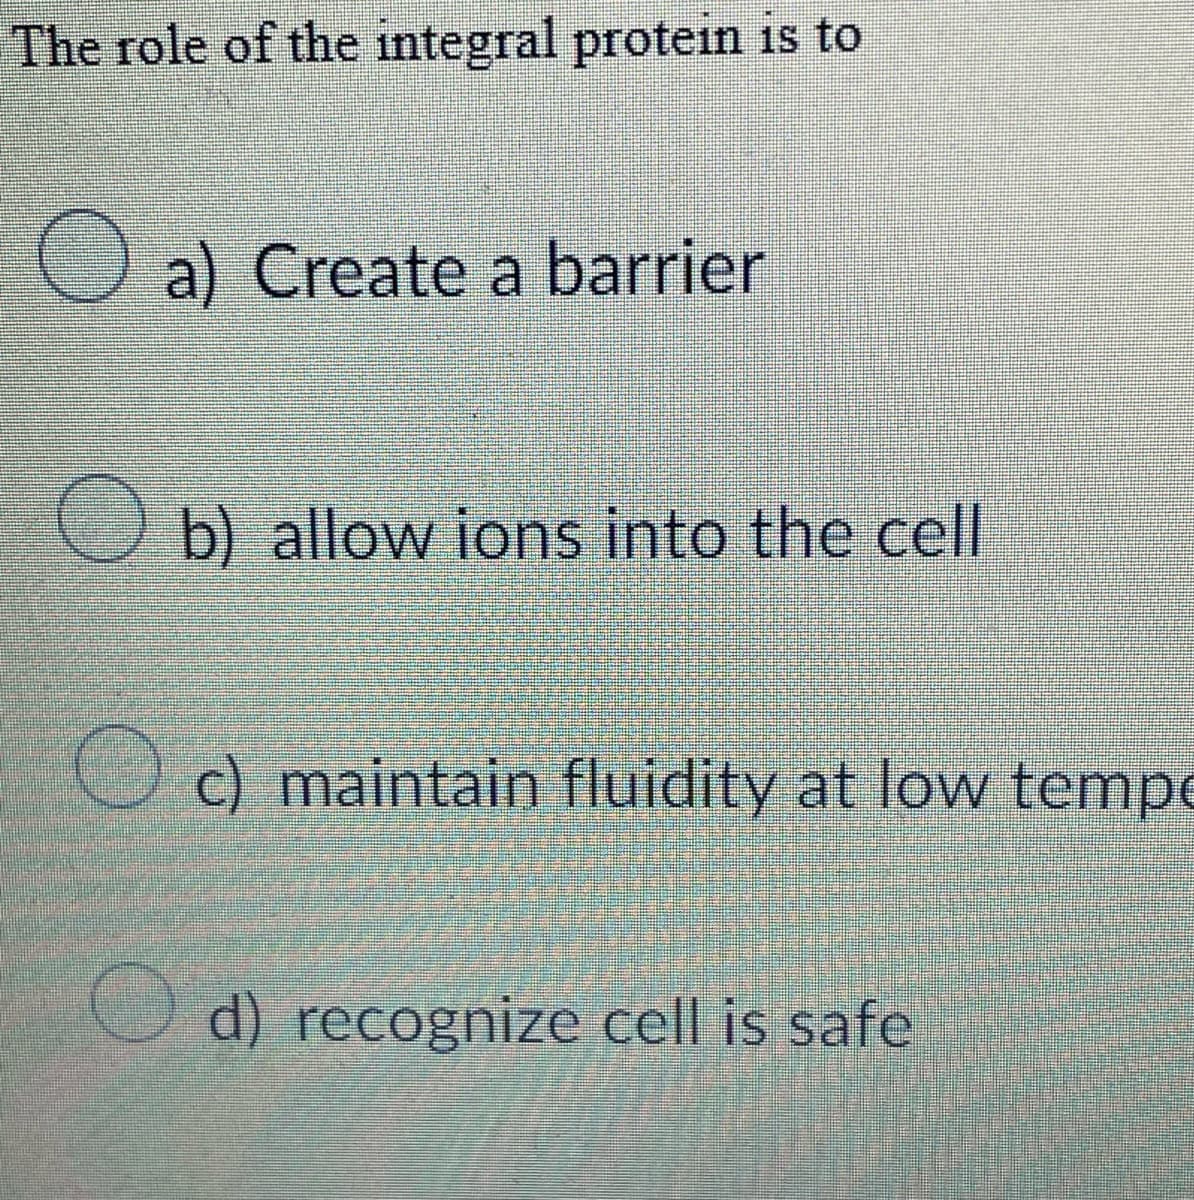 The role of the integral protein is to
a) Create a barrier
b) allow ions into the cell
c) maintain fluidity at low tempe
d) recognize cell is safe